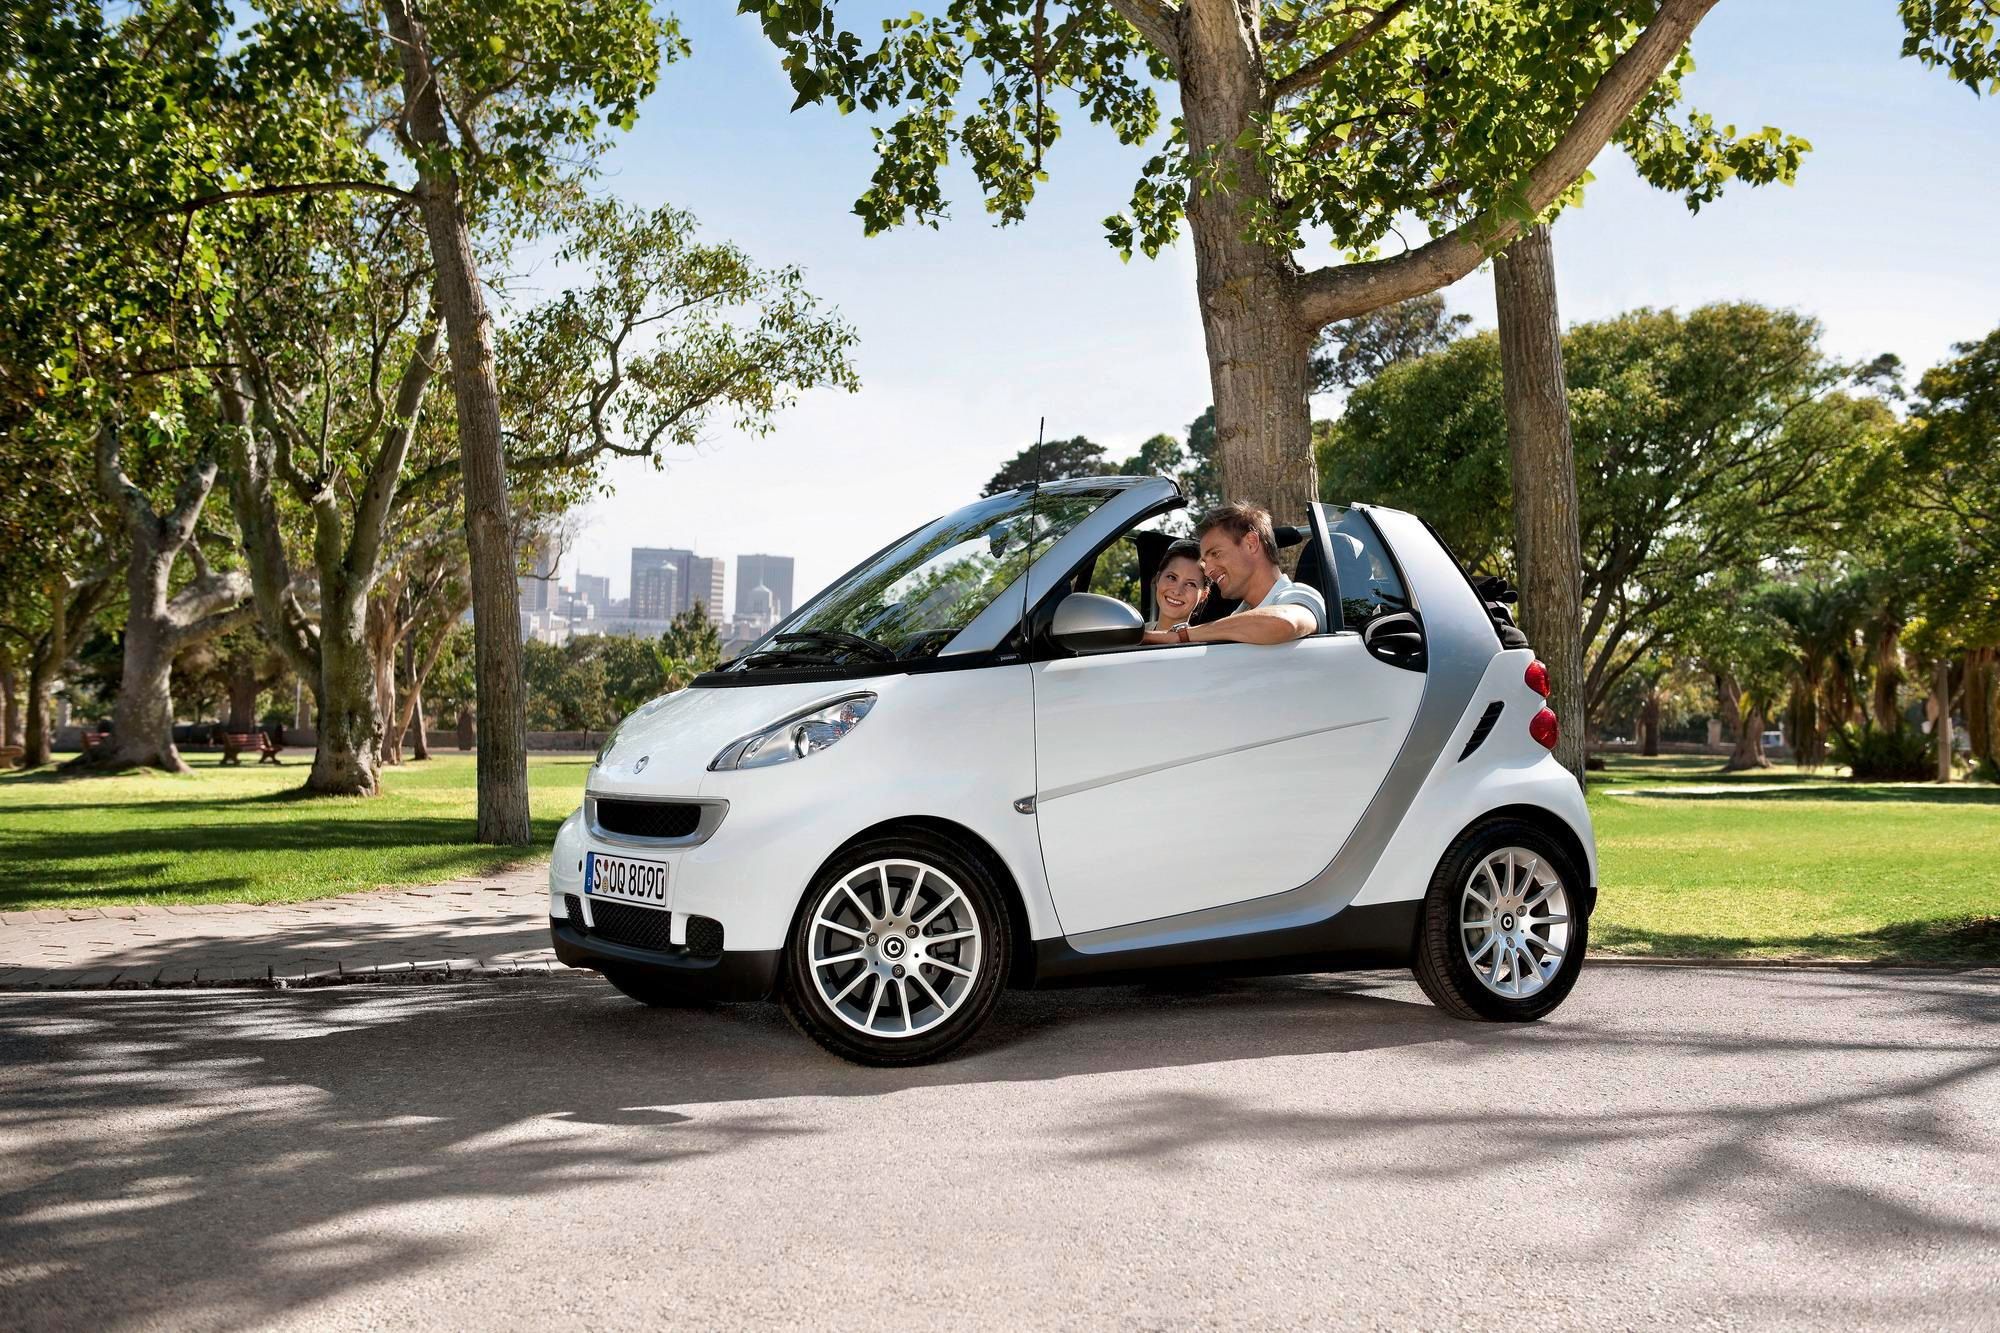 2009 All new more powerful Smart Fortwo cdi